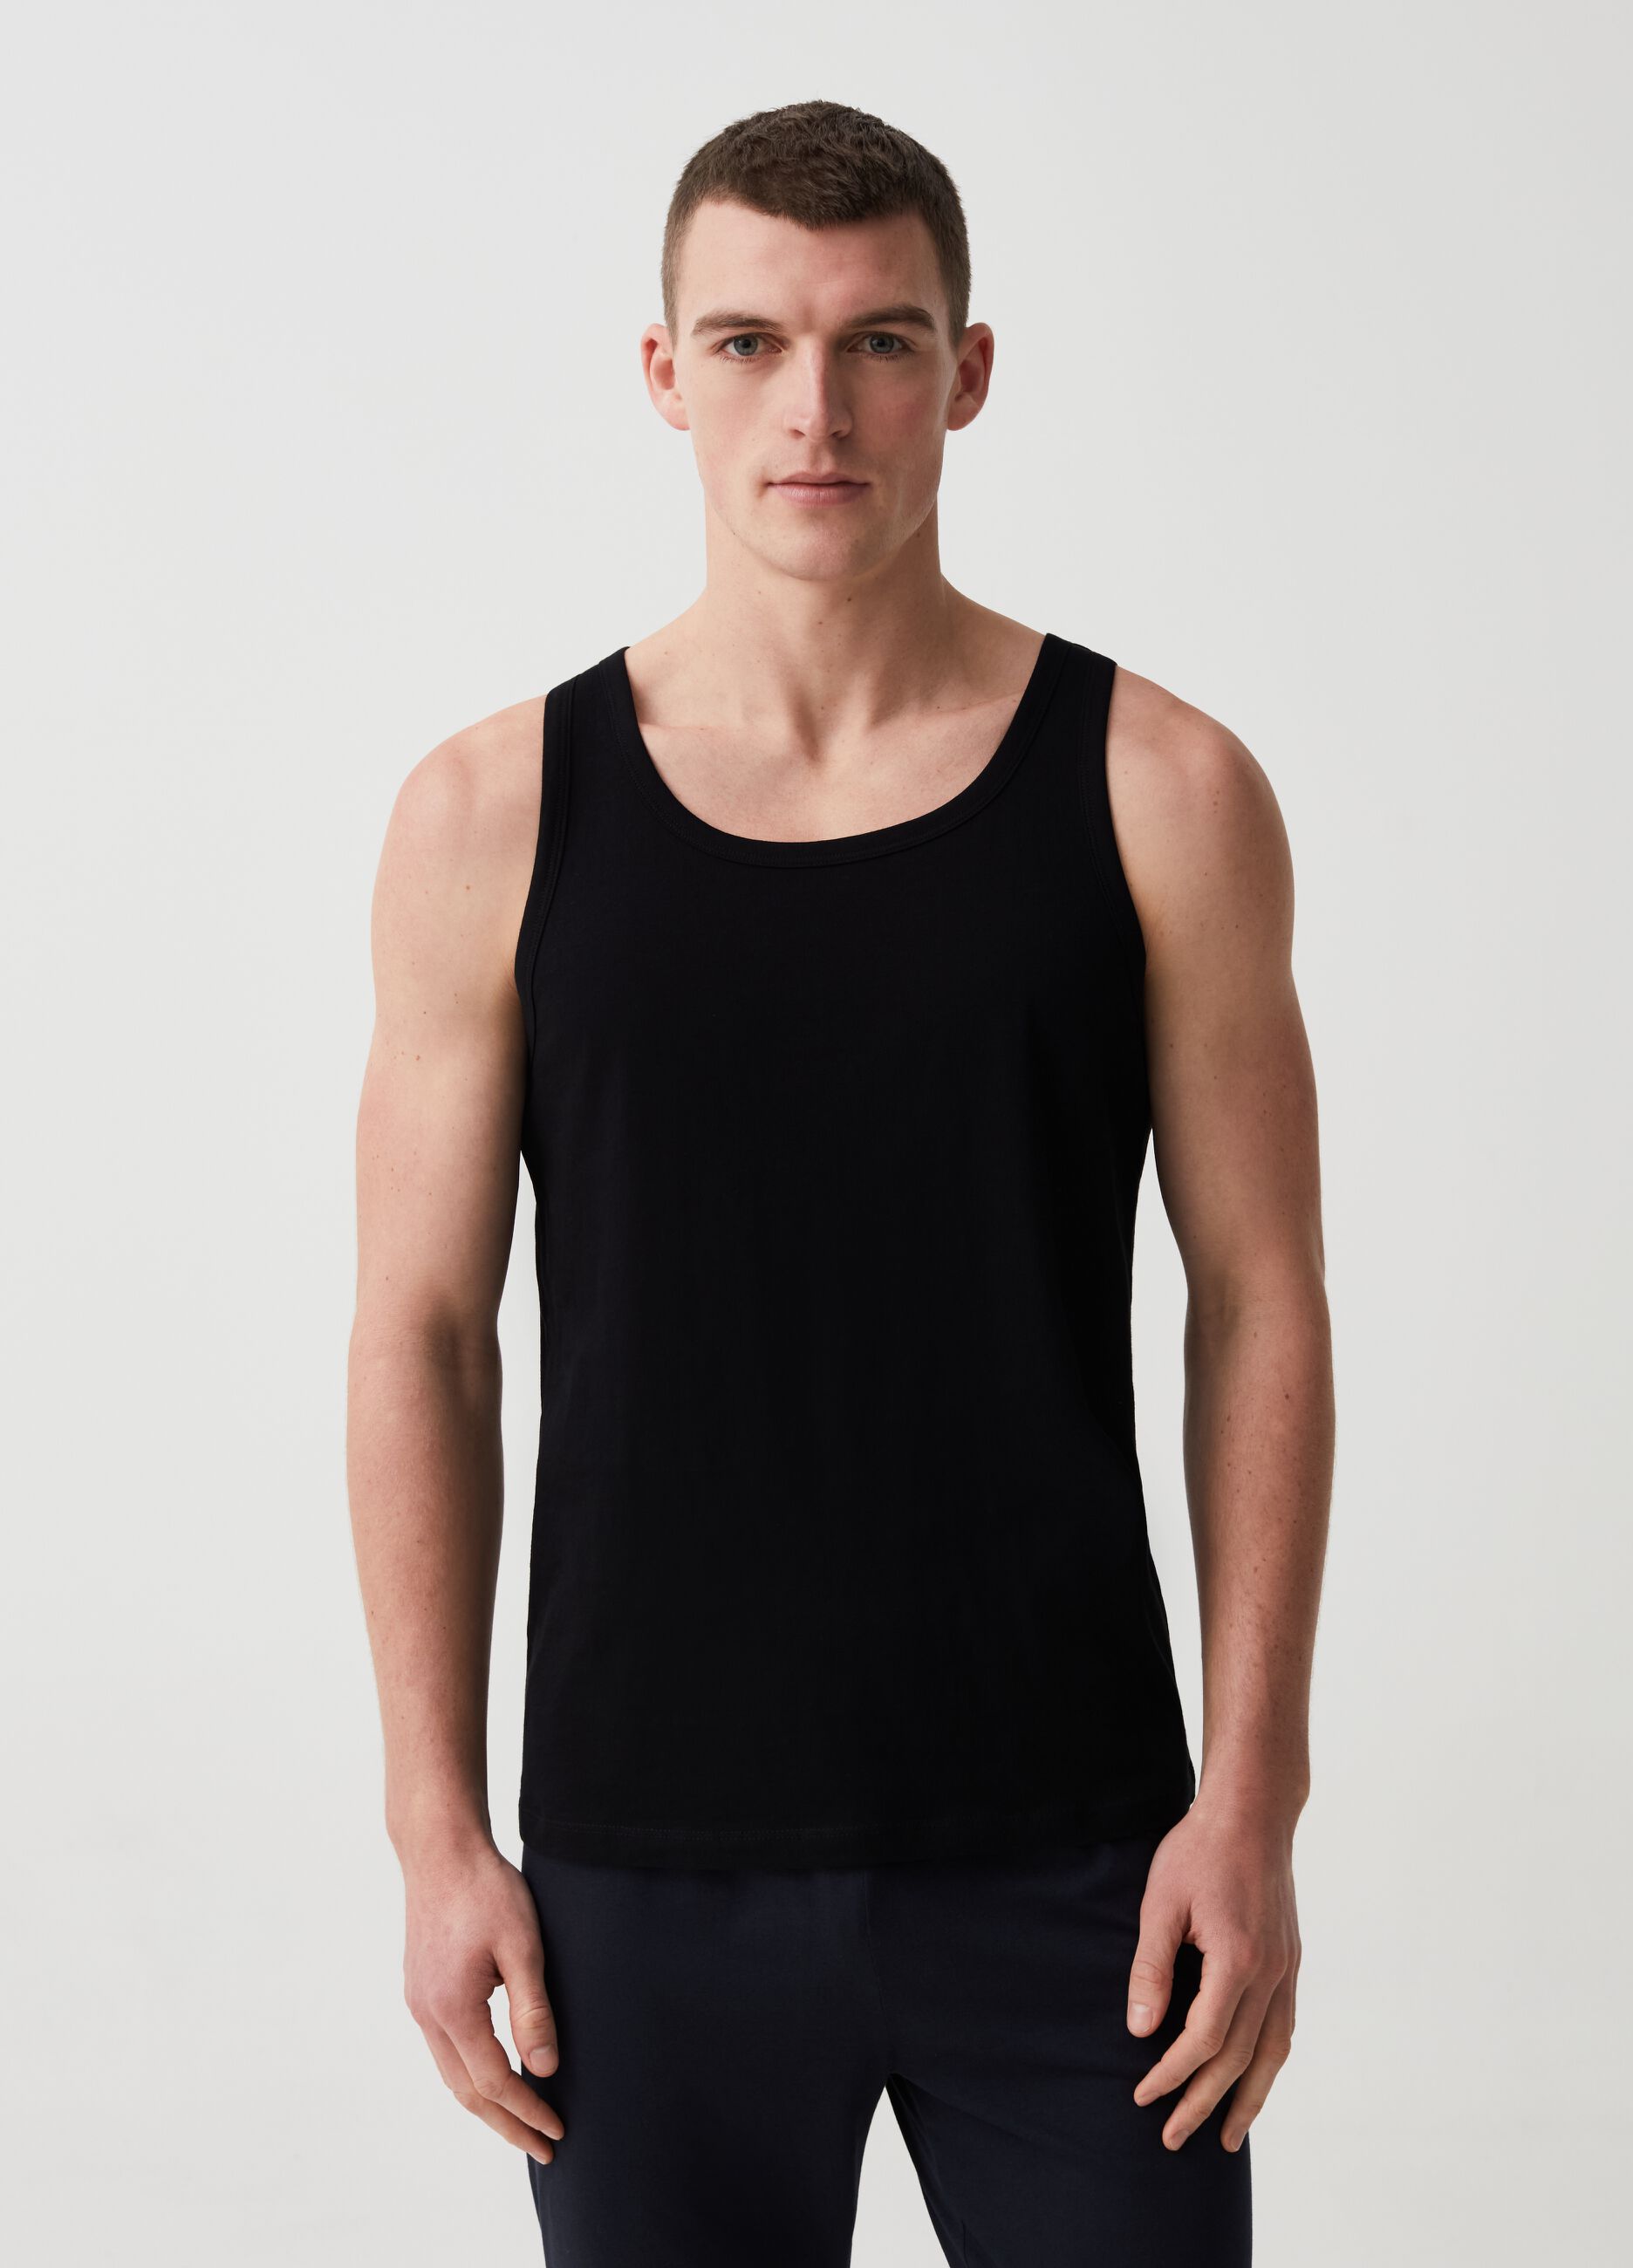 Racer back top with round neck